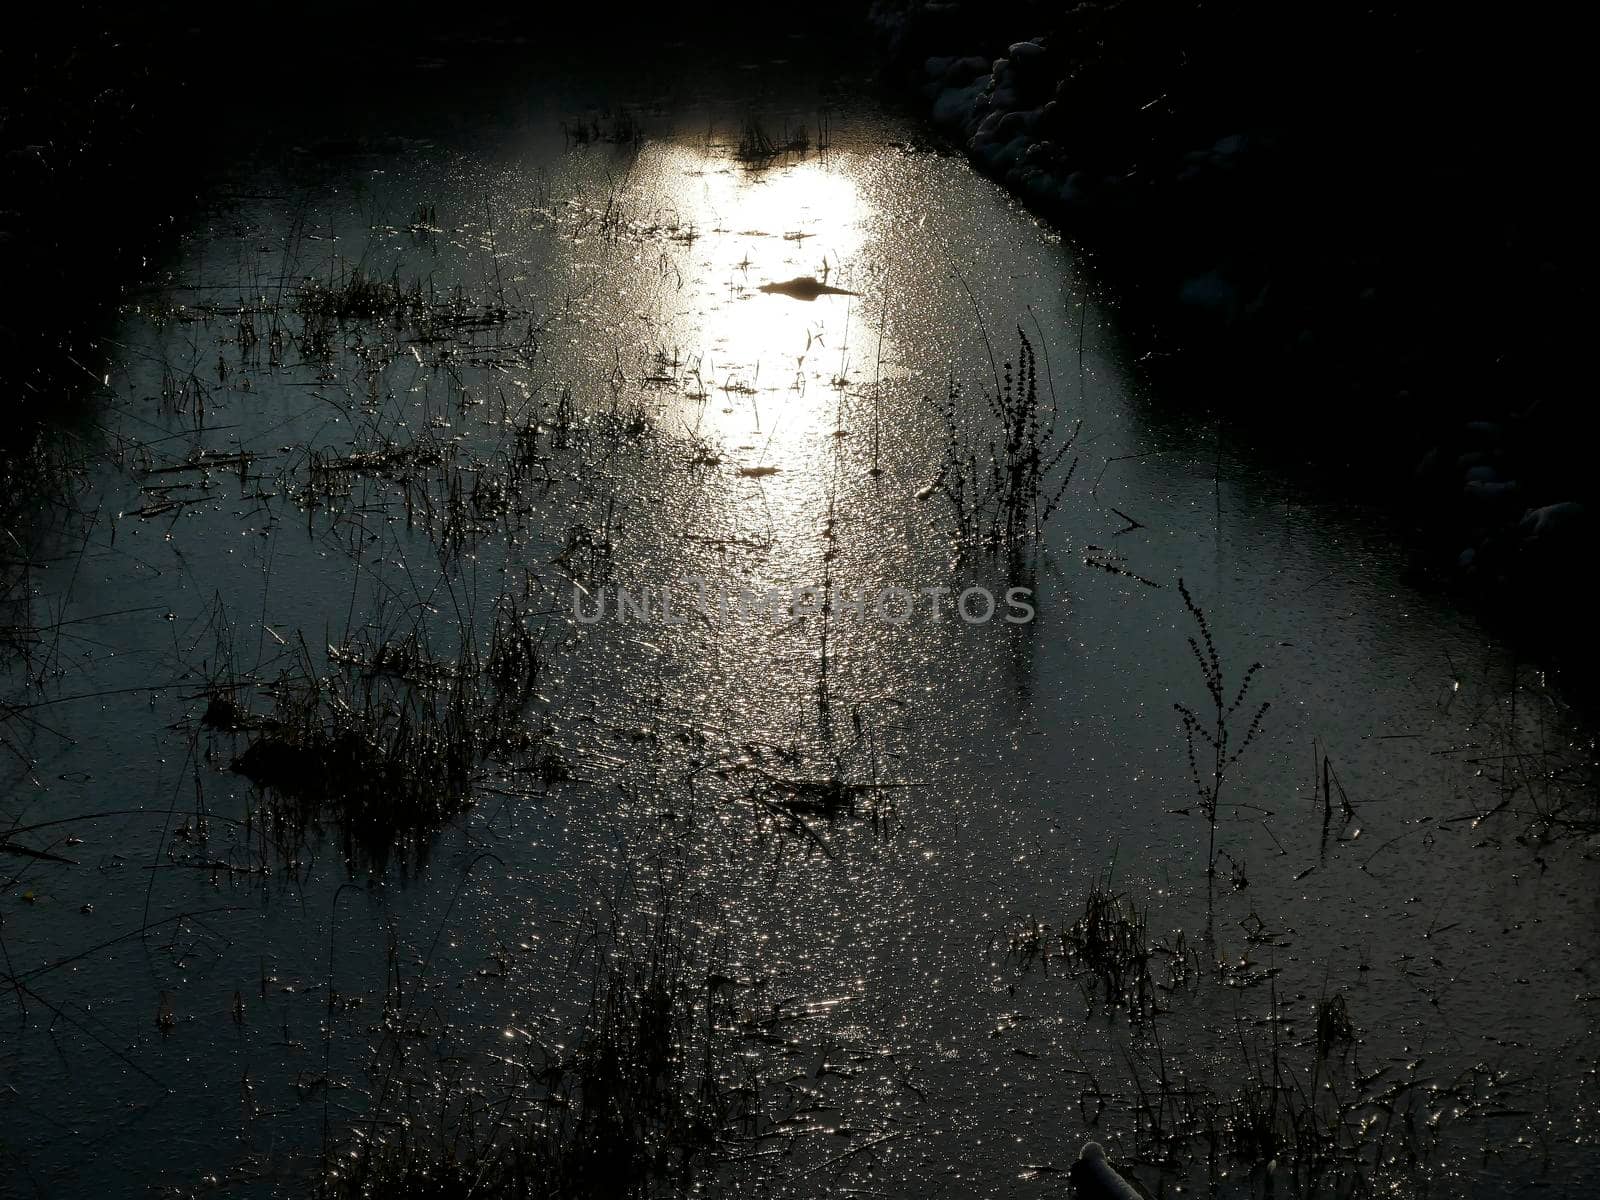 frozen pond with leaves in winter in backlit